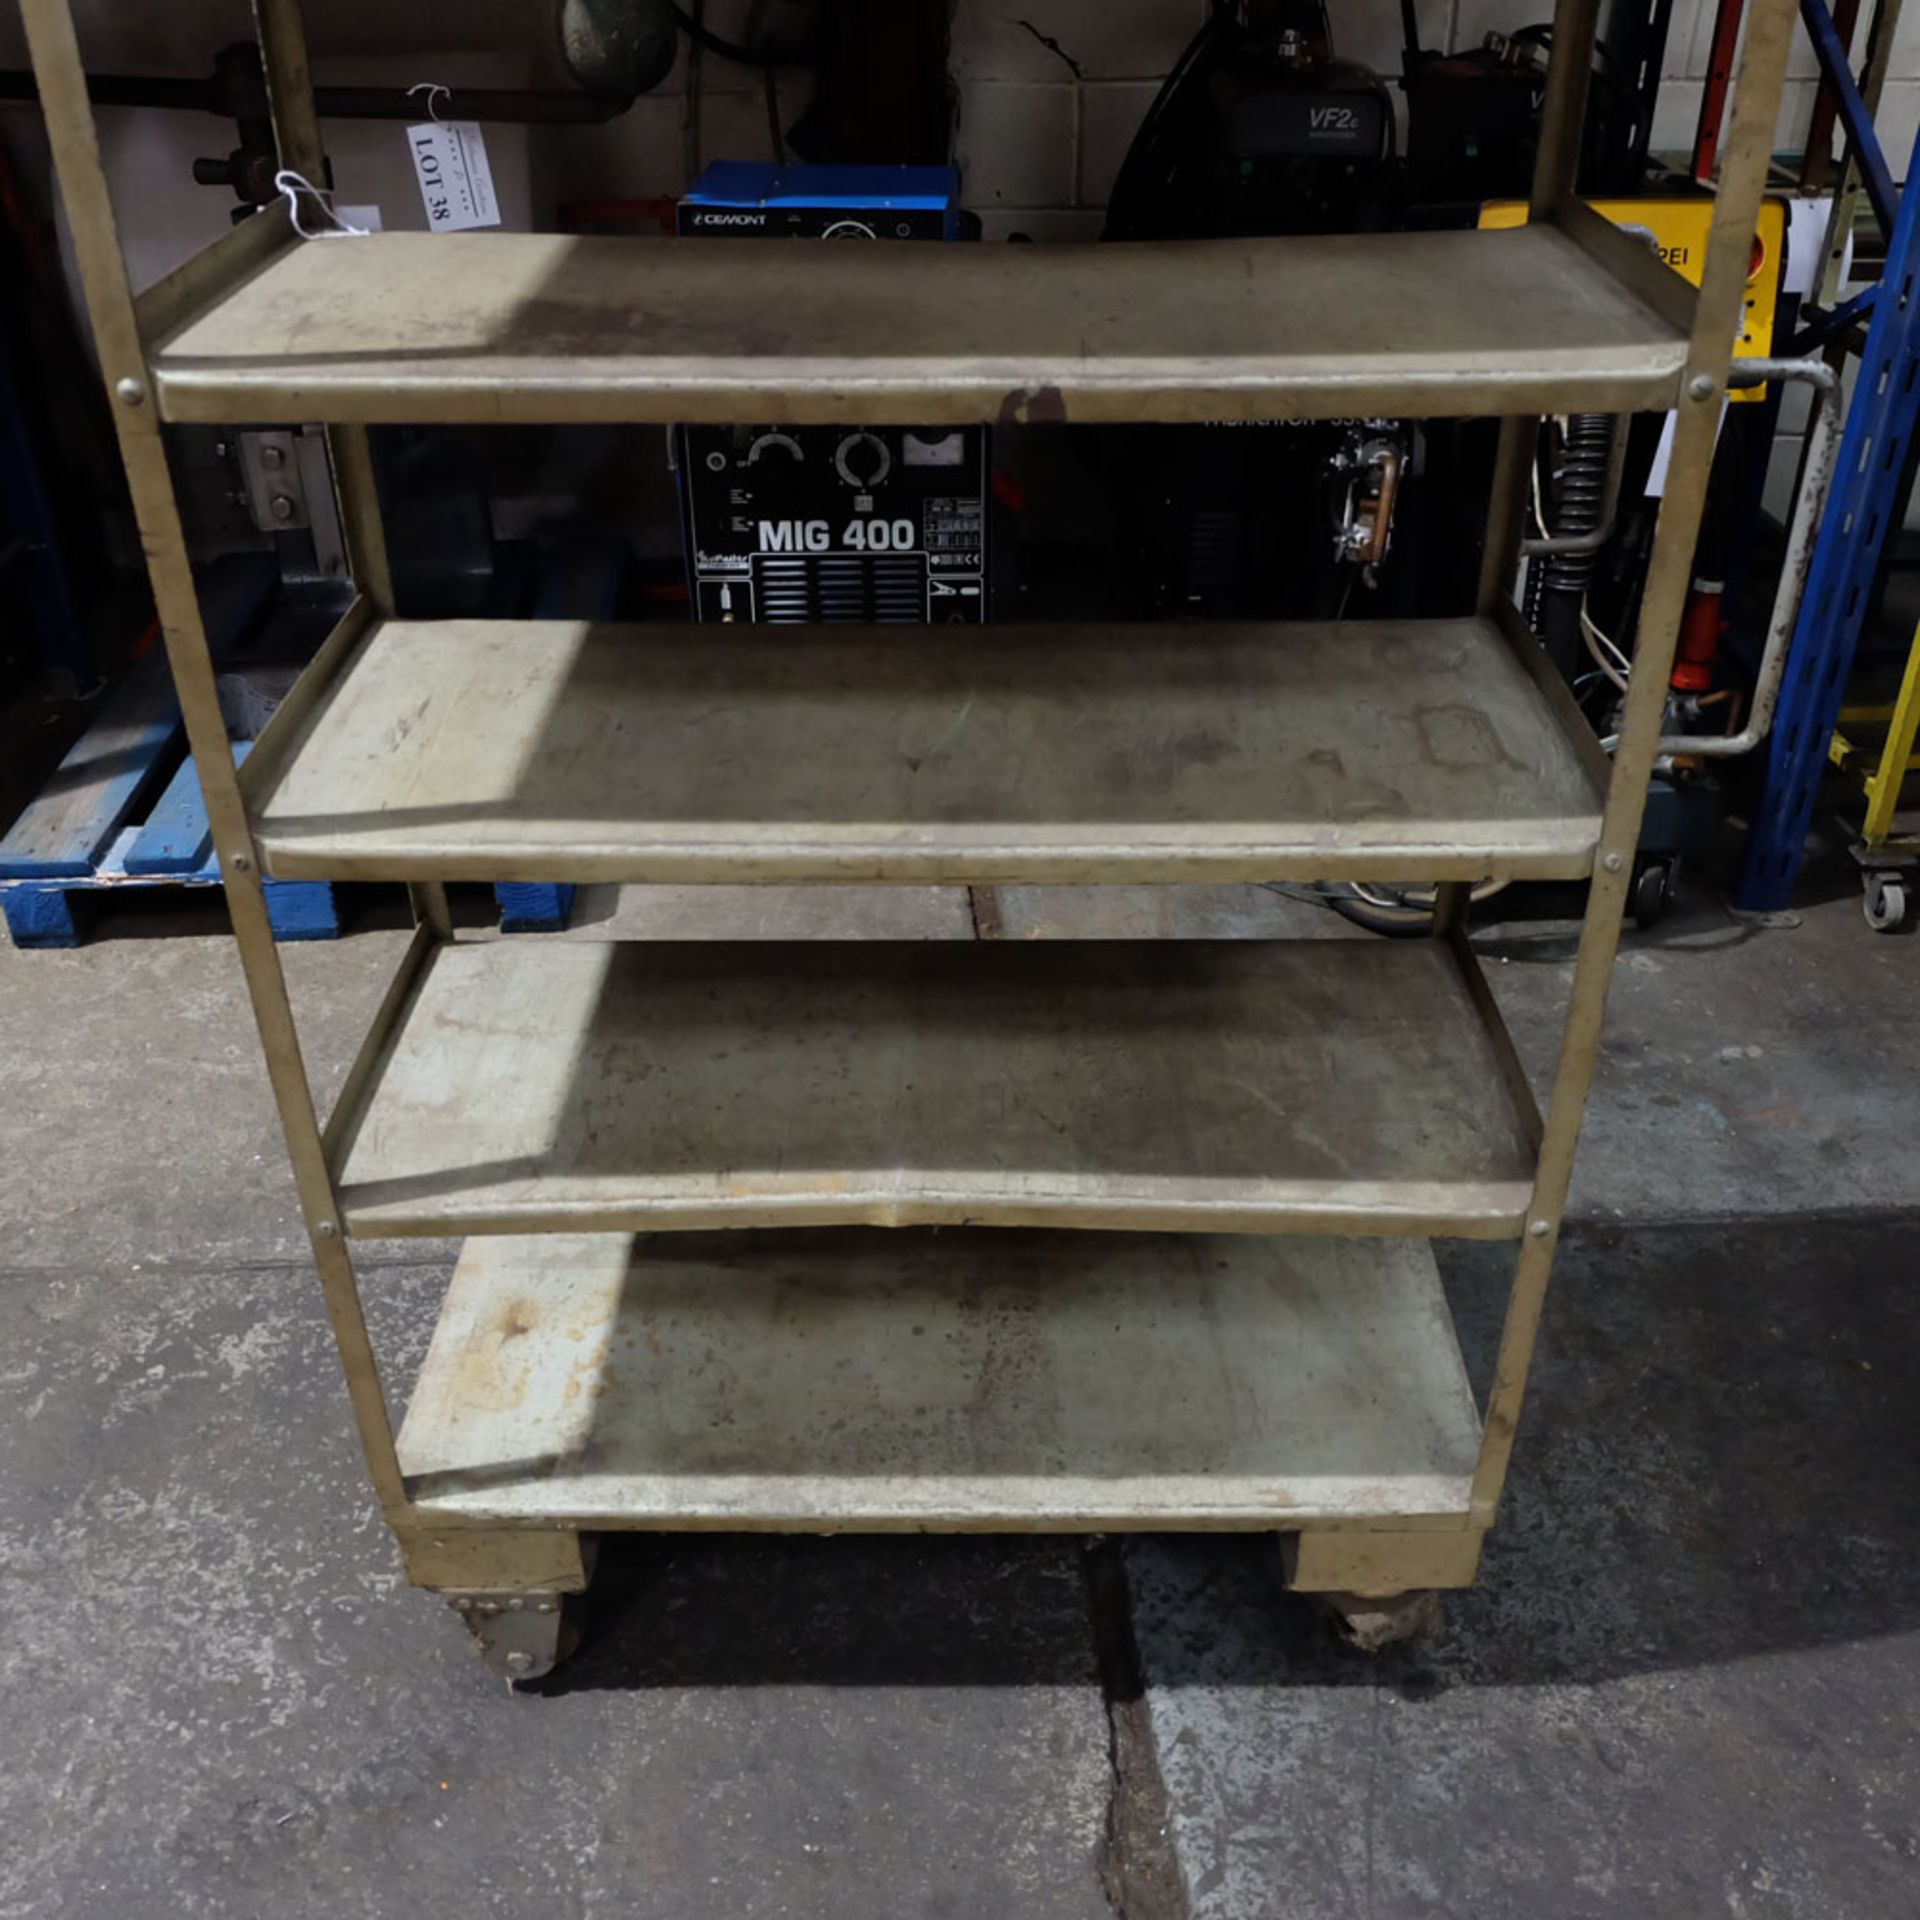 Steel Shelves. Shelf Size Approx 35 1/2" x 15 . Overall Height 60". - Image 4 of 5